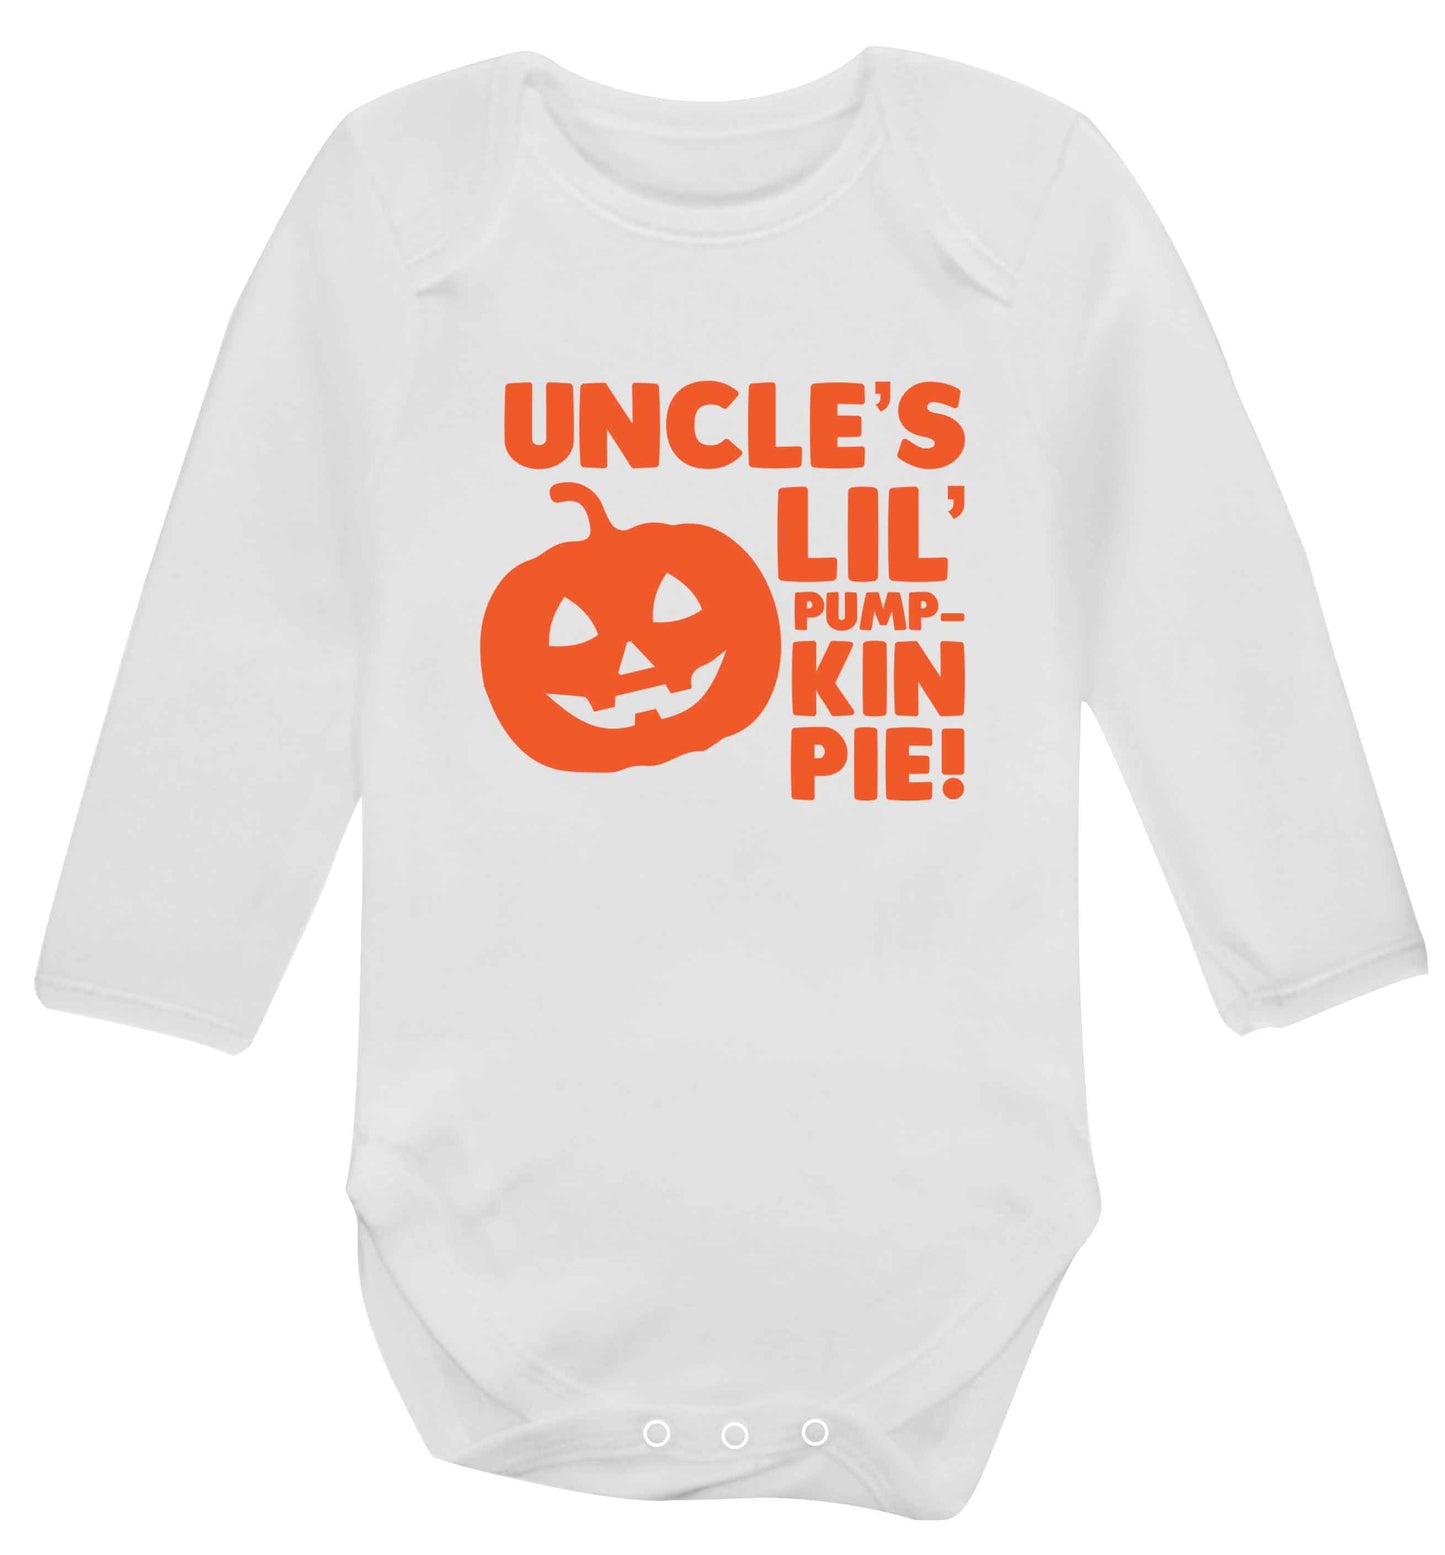 Uncle's lil' pumpkin pie baby vest long sleeved white 6-12 months